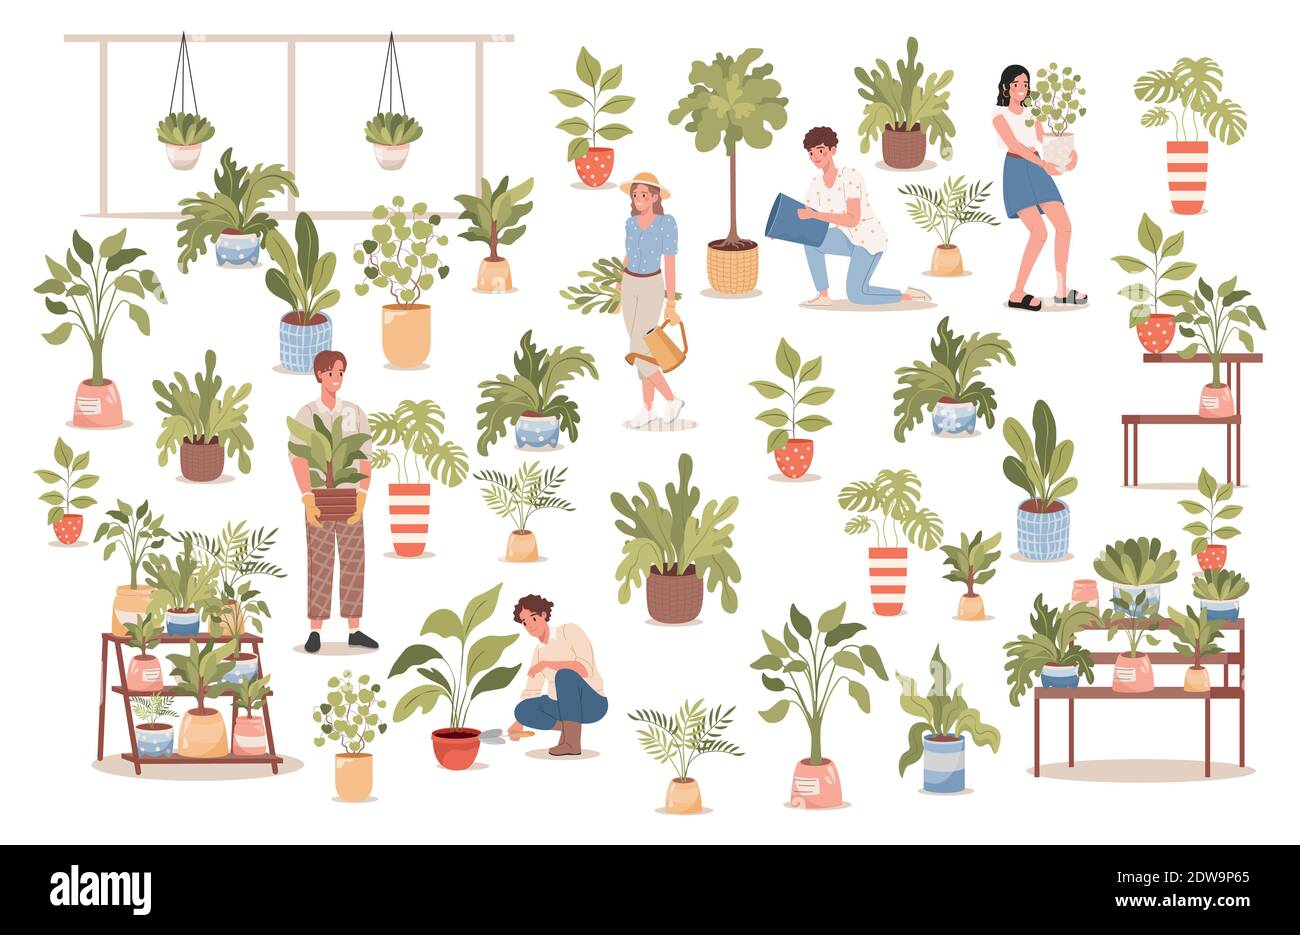 Group of happy smiling people in comfortable clothes in flower shop vector flat illustration. Men and women taking care of plants, watering, planting flowers. Agriculture gardener hobby concept. Stock Vector